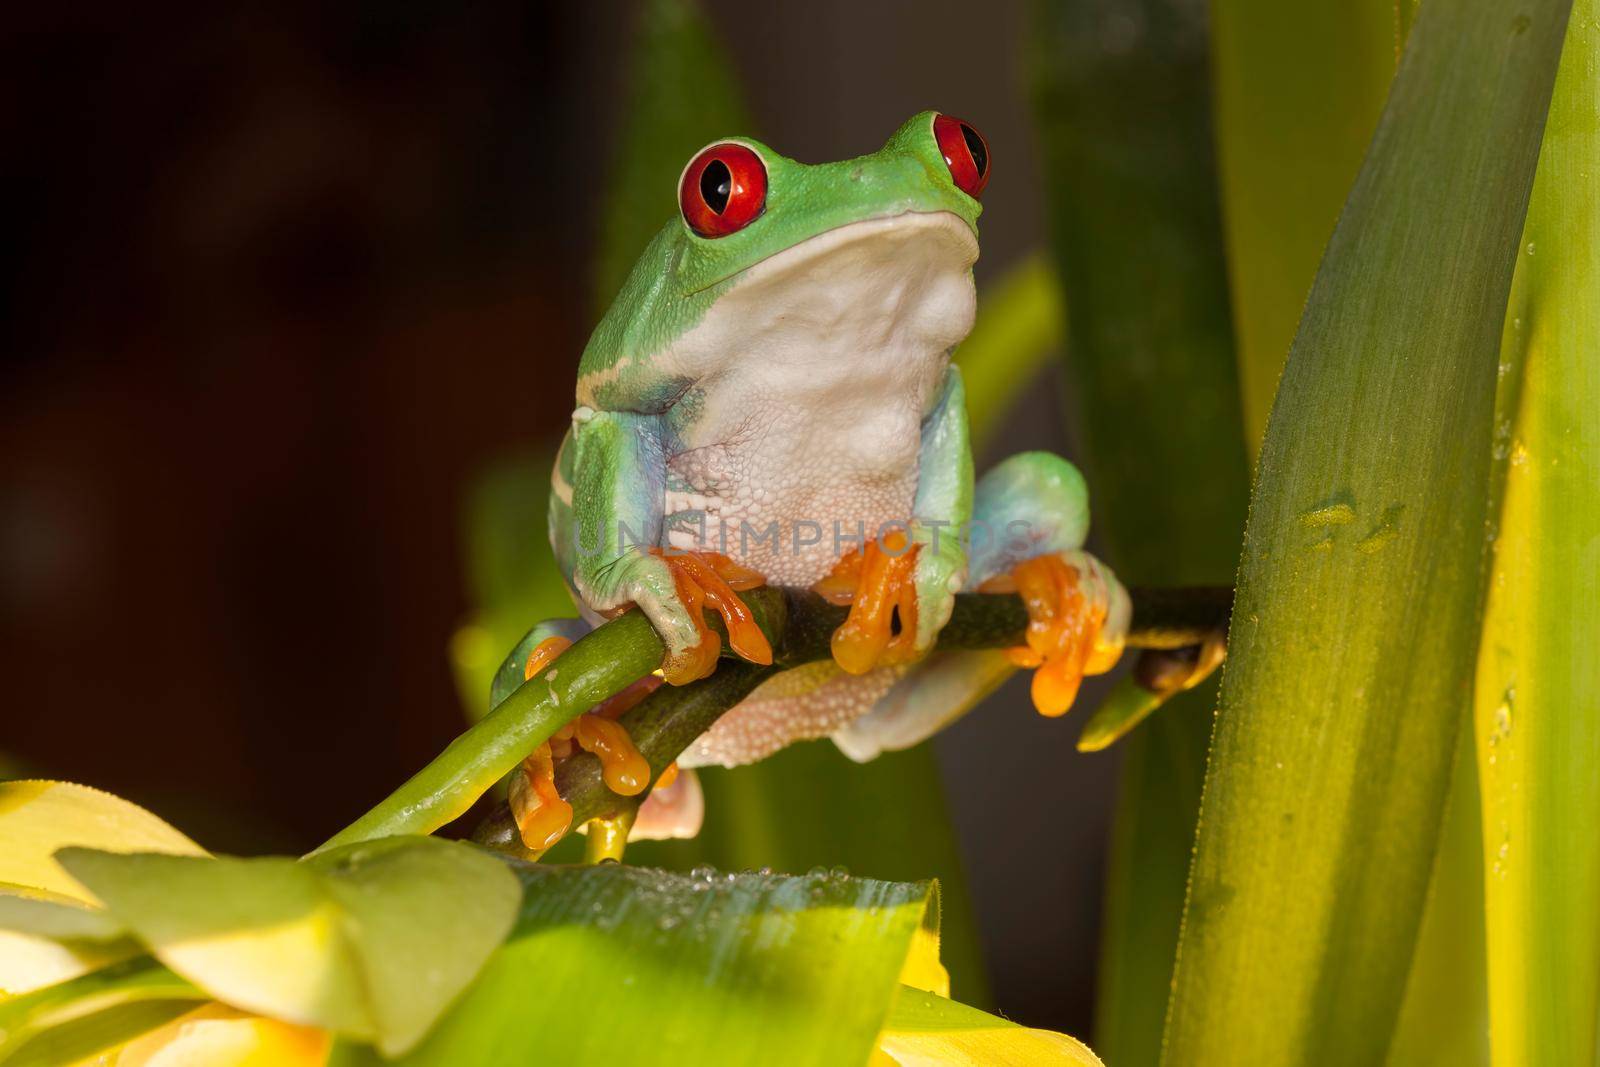 Red-eyed tree frog by Lincikas